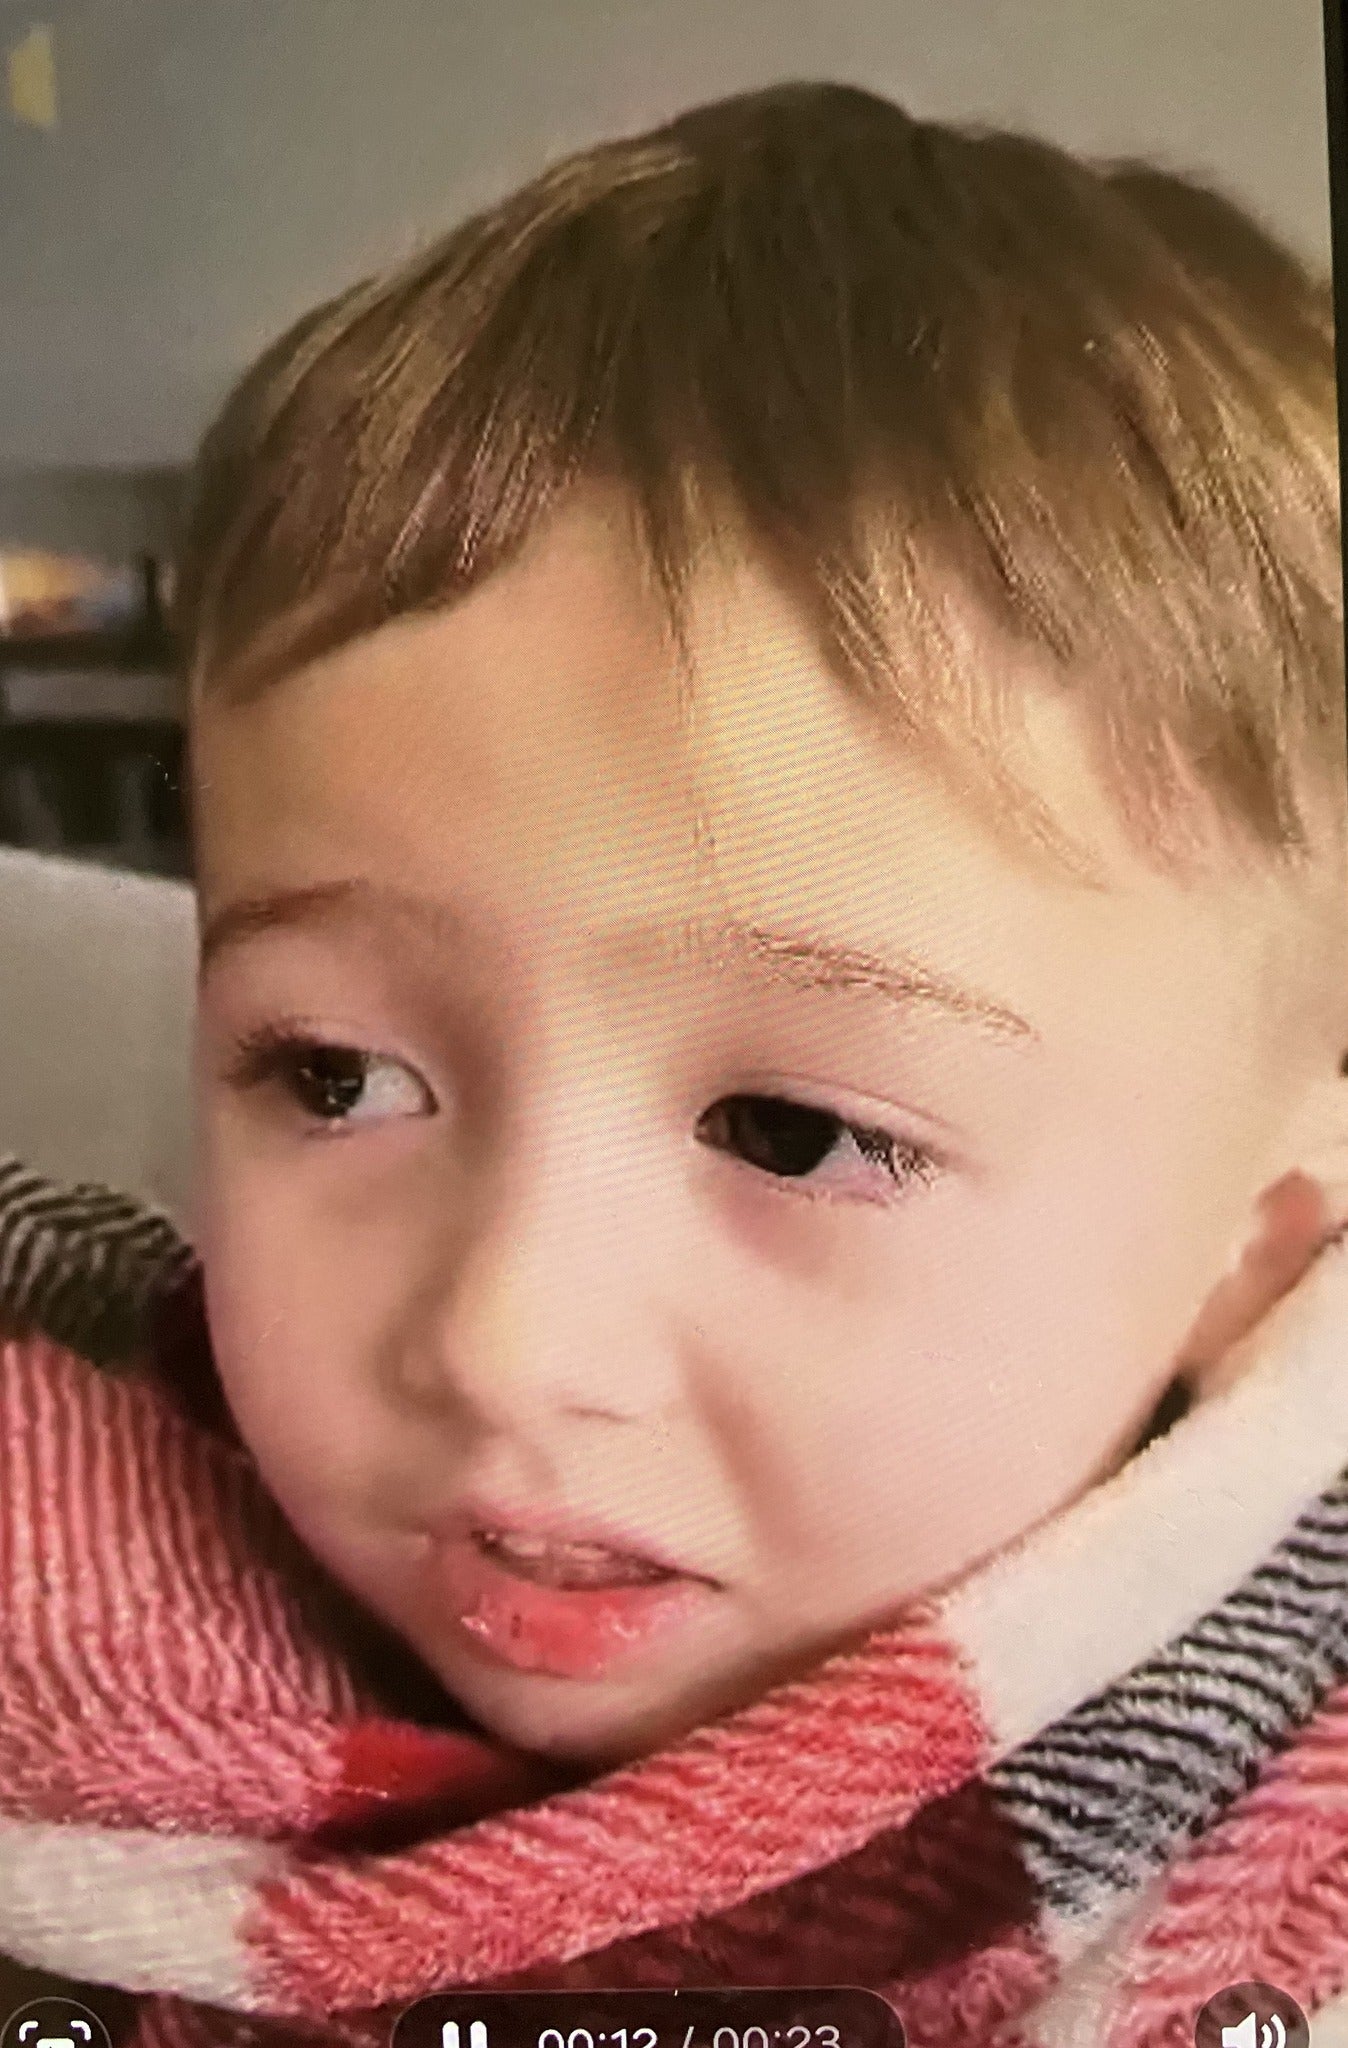 Elijah’s red-and-white blanket is the only clue reported to have been found since his disappearance